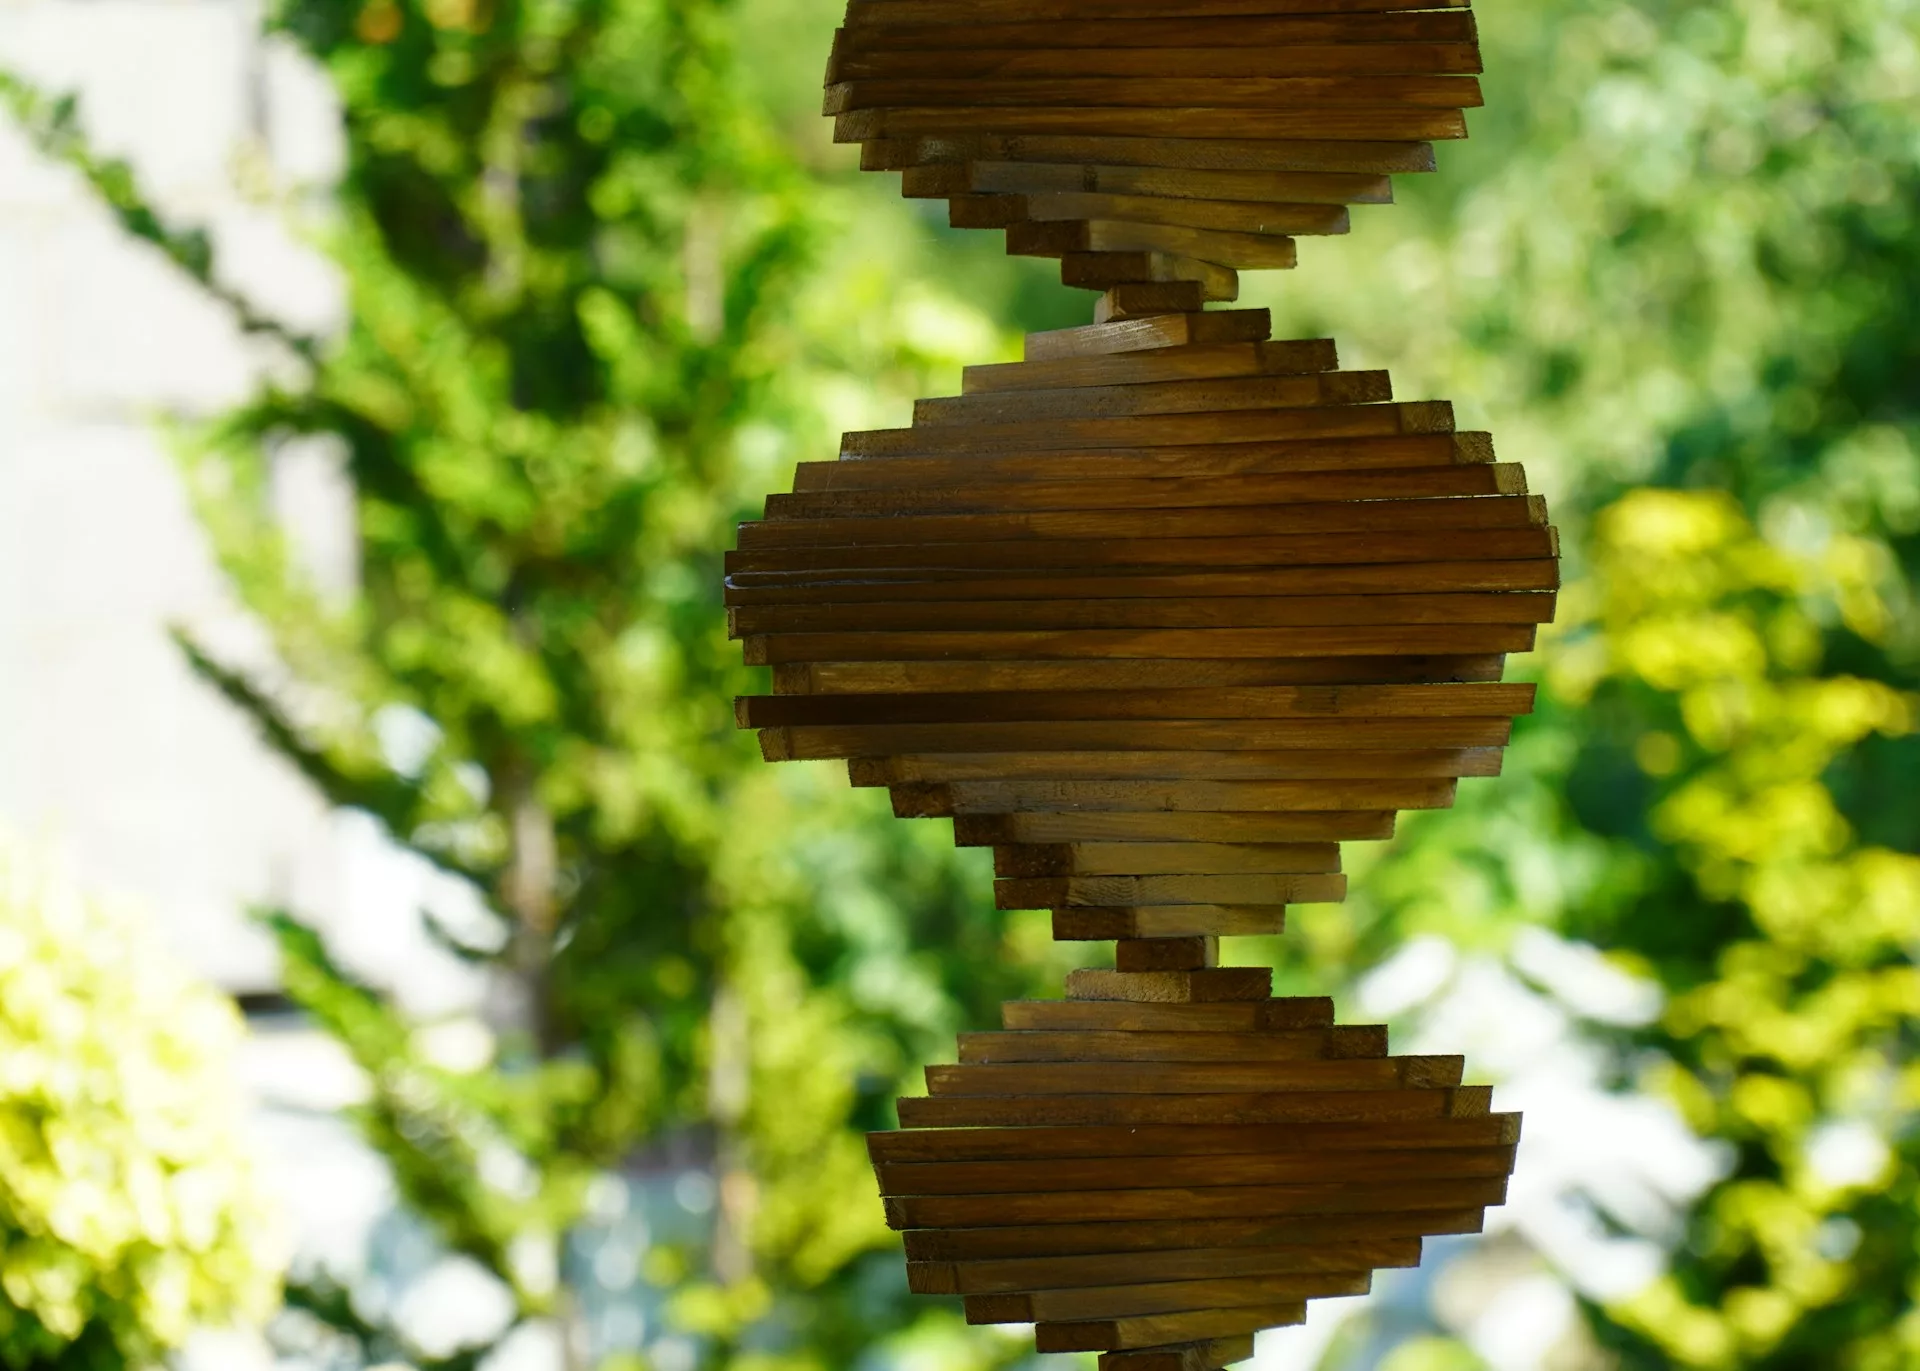 a DNA double helix made out of wood